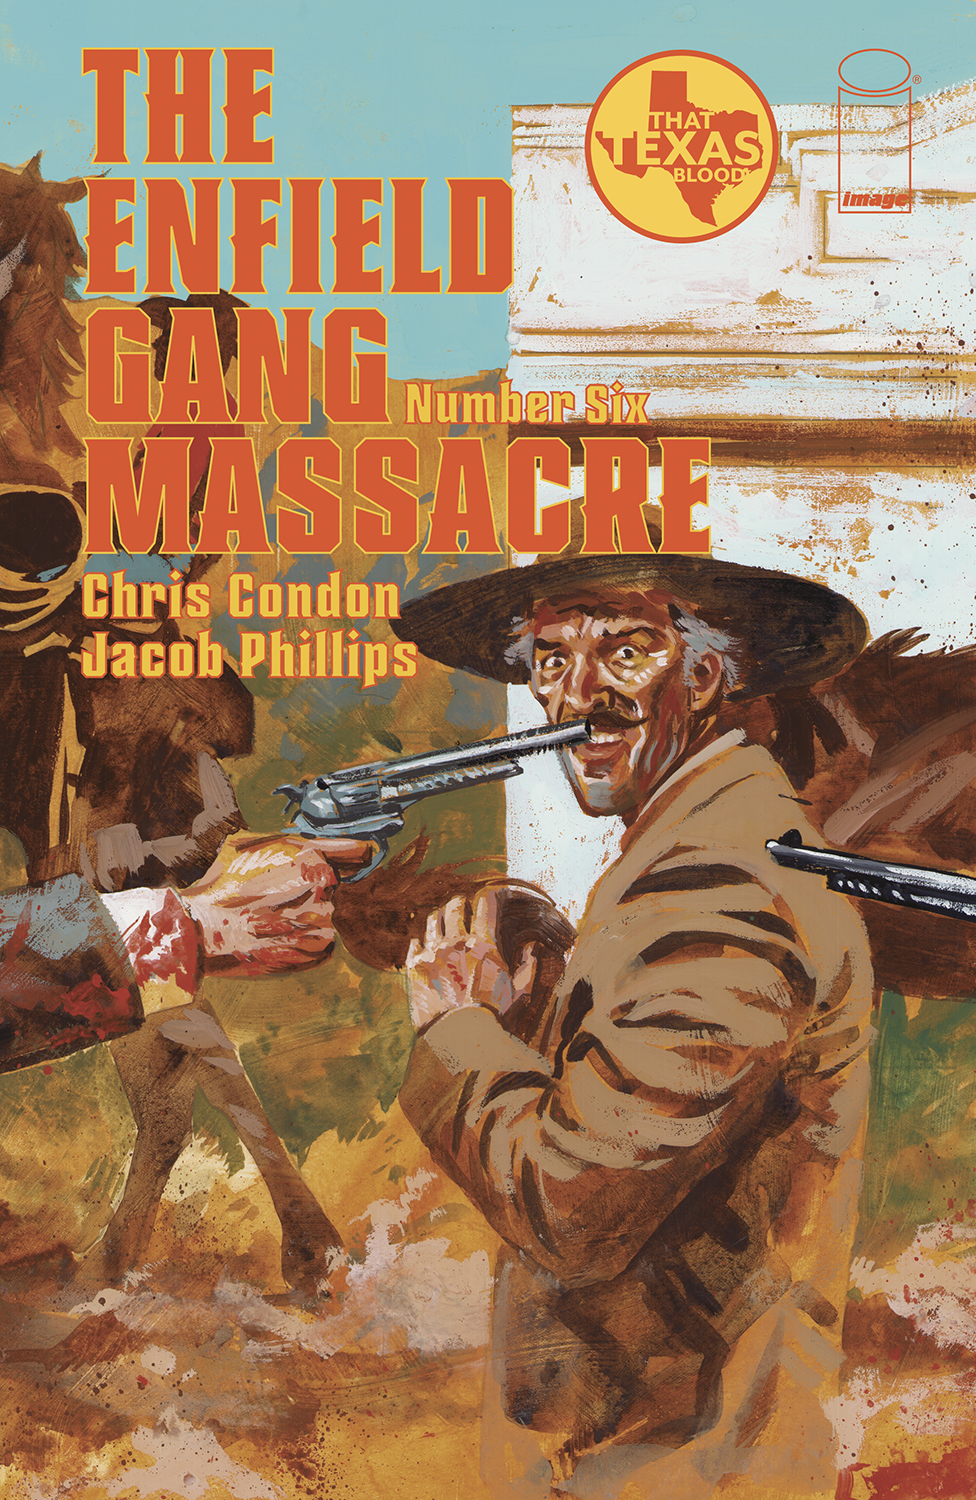 Enfield Gang Massacre #6 Cover A Jacob Phillips (Of 6)